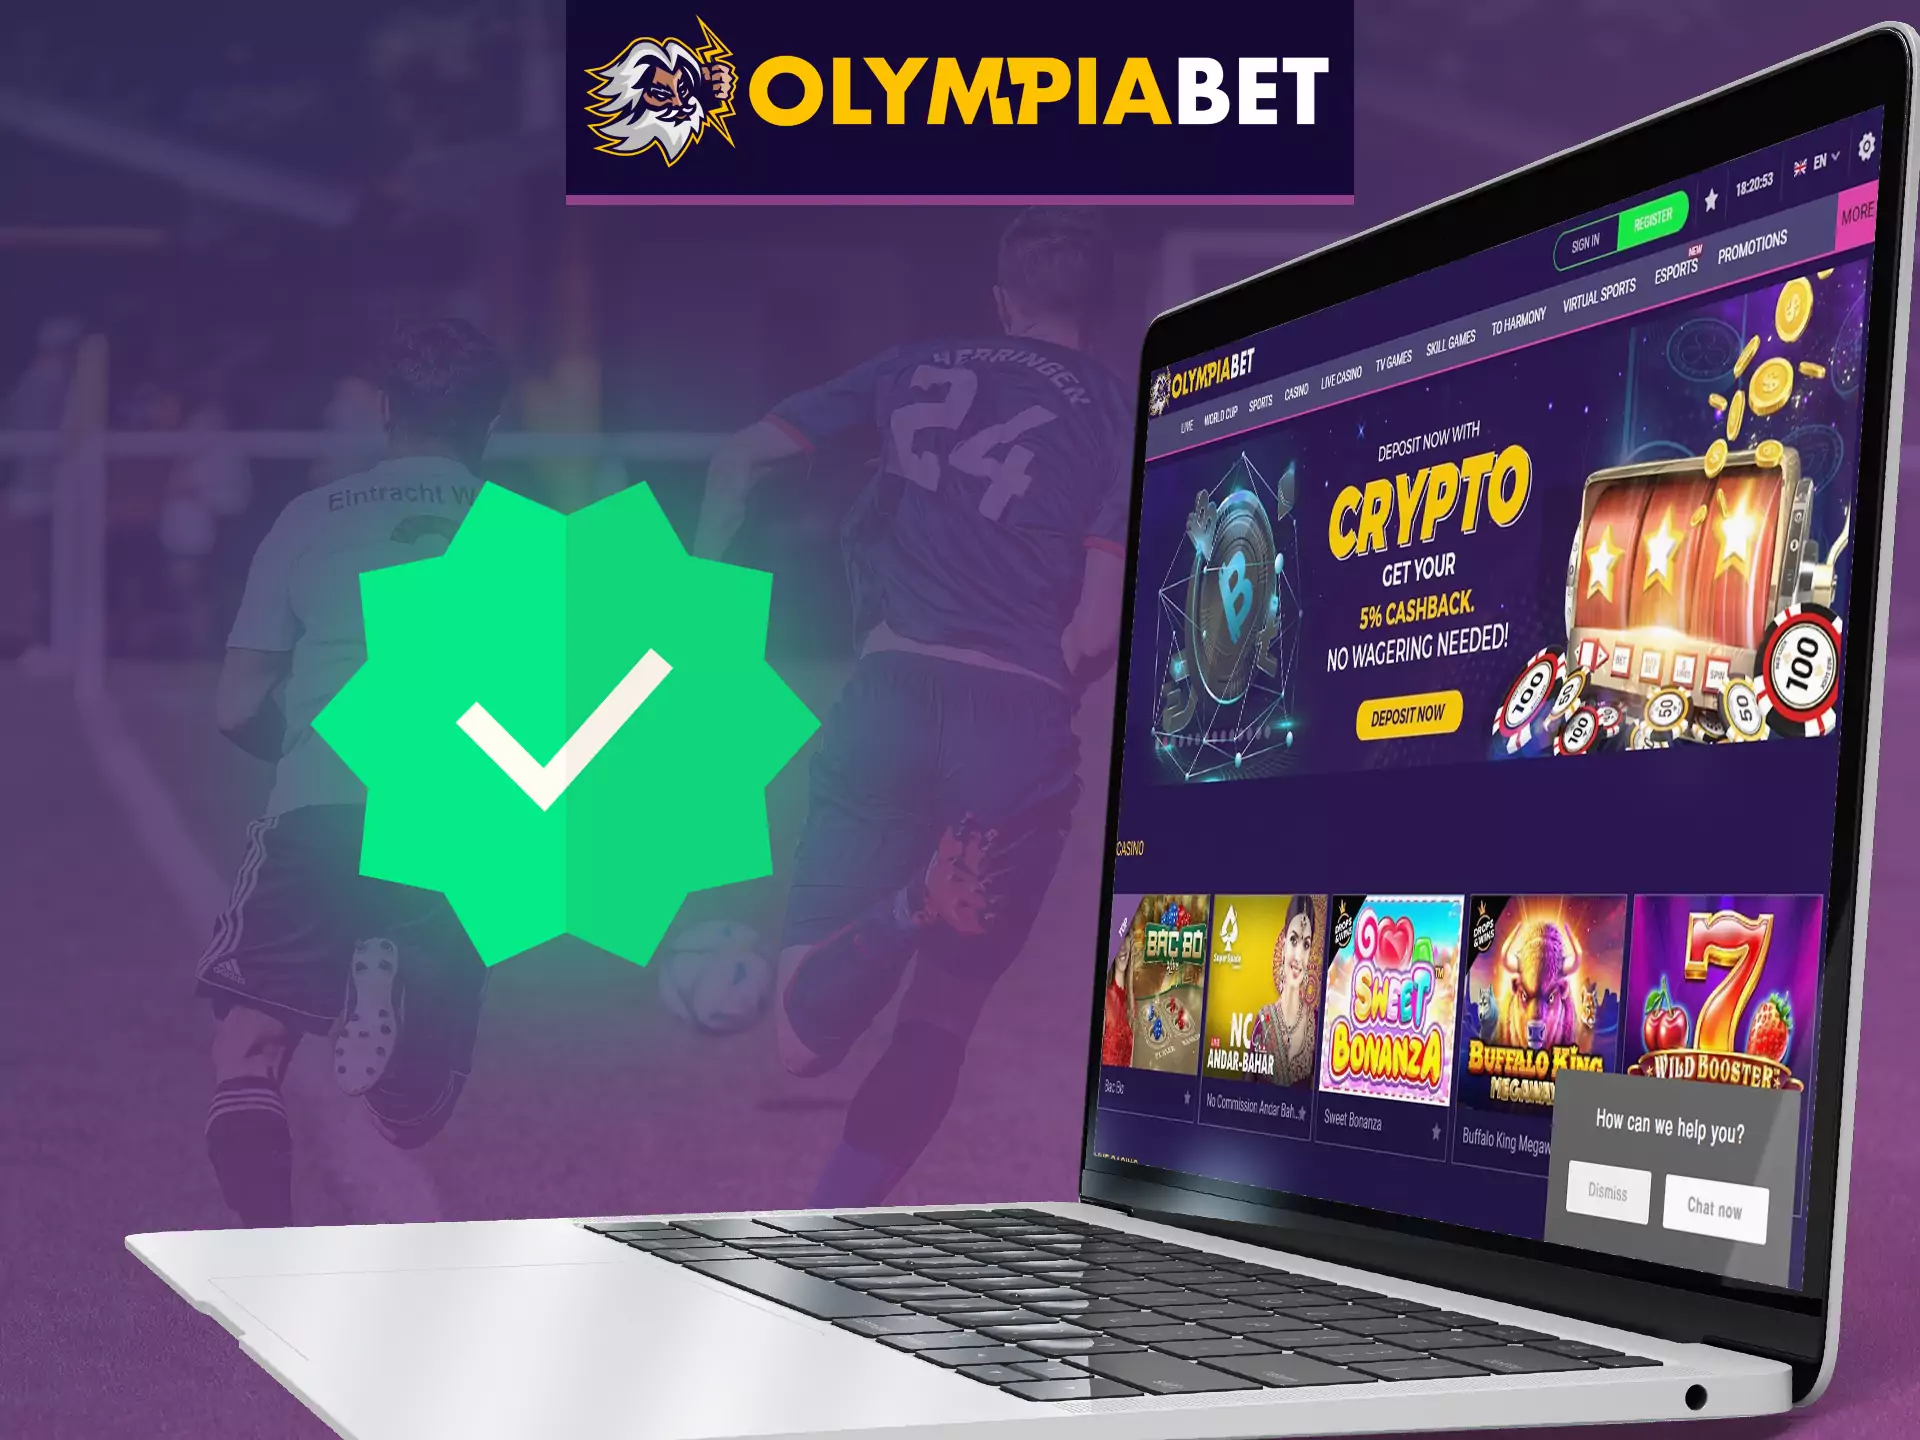 Go through a simple verification of OlympiaBet, confirm your identity, get all the benefits of the service.